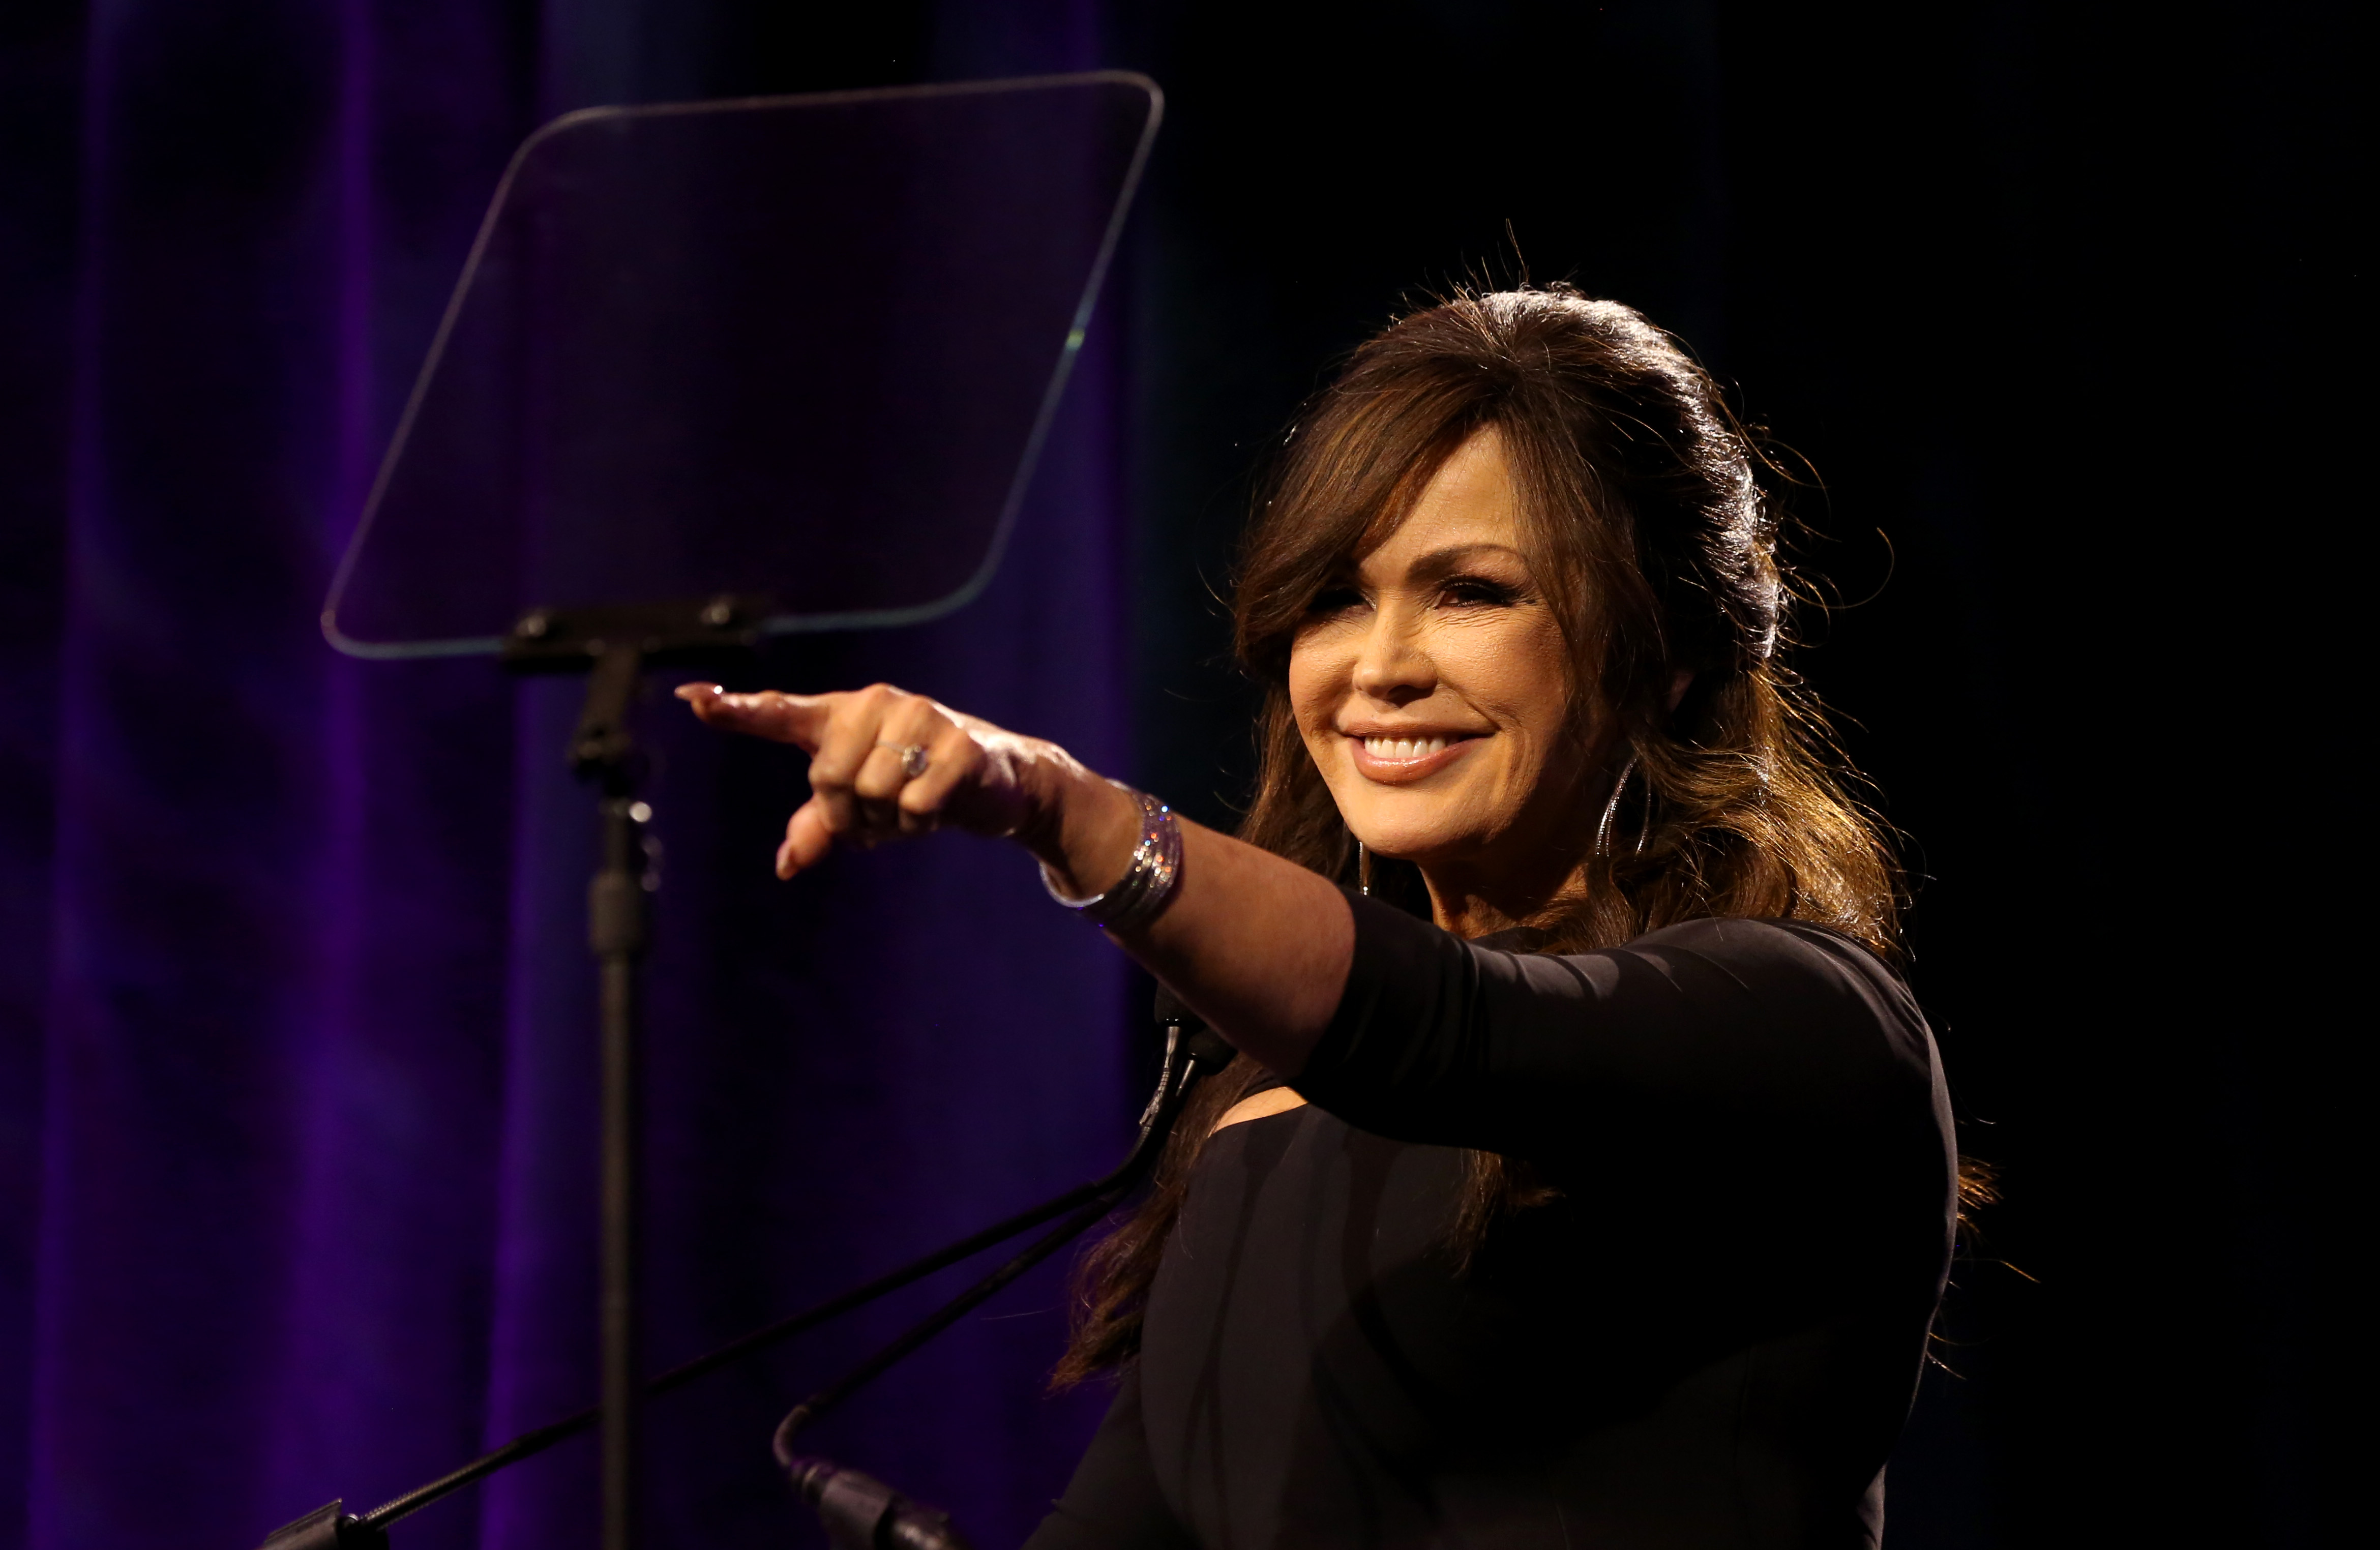 Marie Osmond during the 36th Annual Black and White Ball event on January 25, 2020, in Las Vegas, Nevada | Source: Getty Images